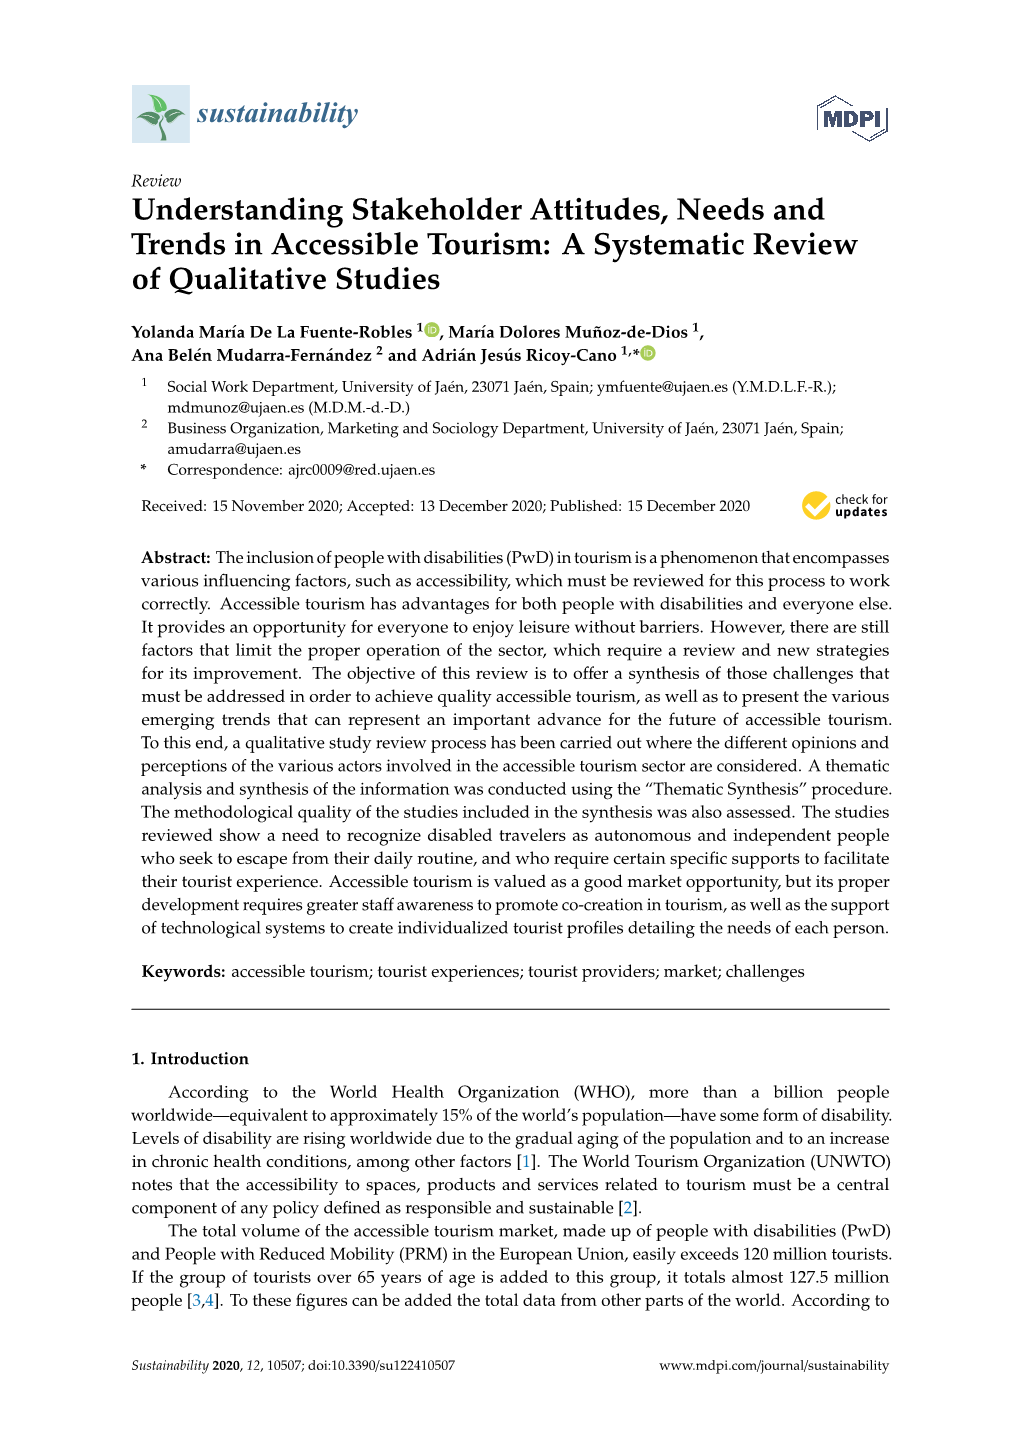 Understanding Stakeholder Attitudes, Needs and Trends in Accessible Tourism: a Systematic Review of Qualitative Studies